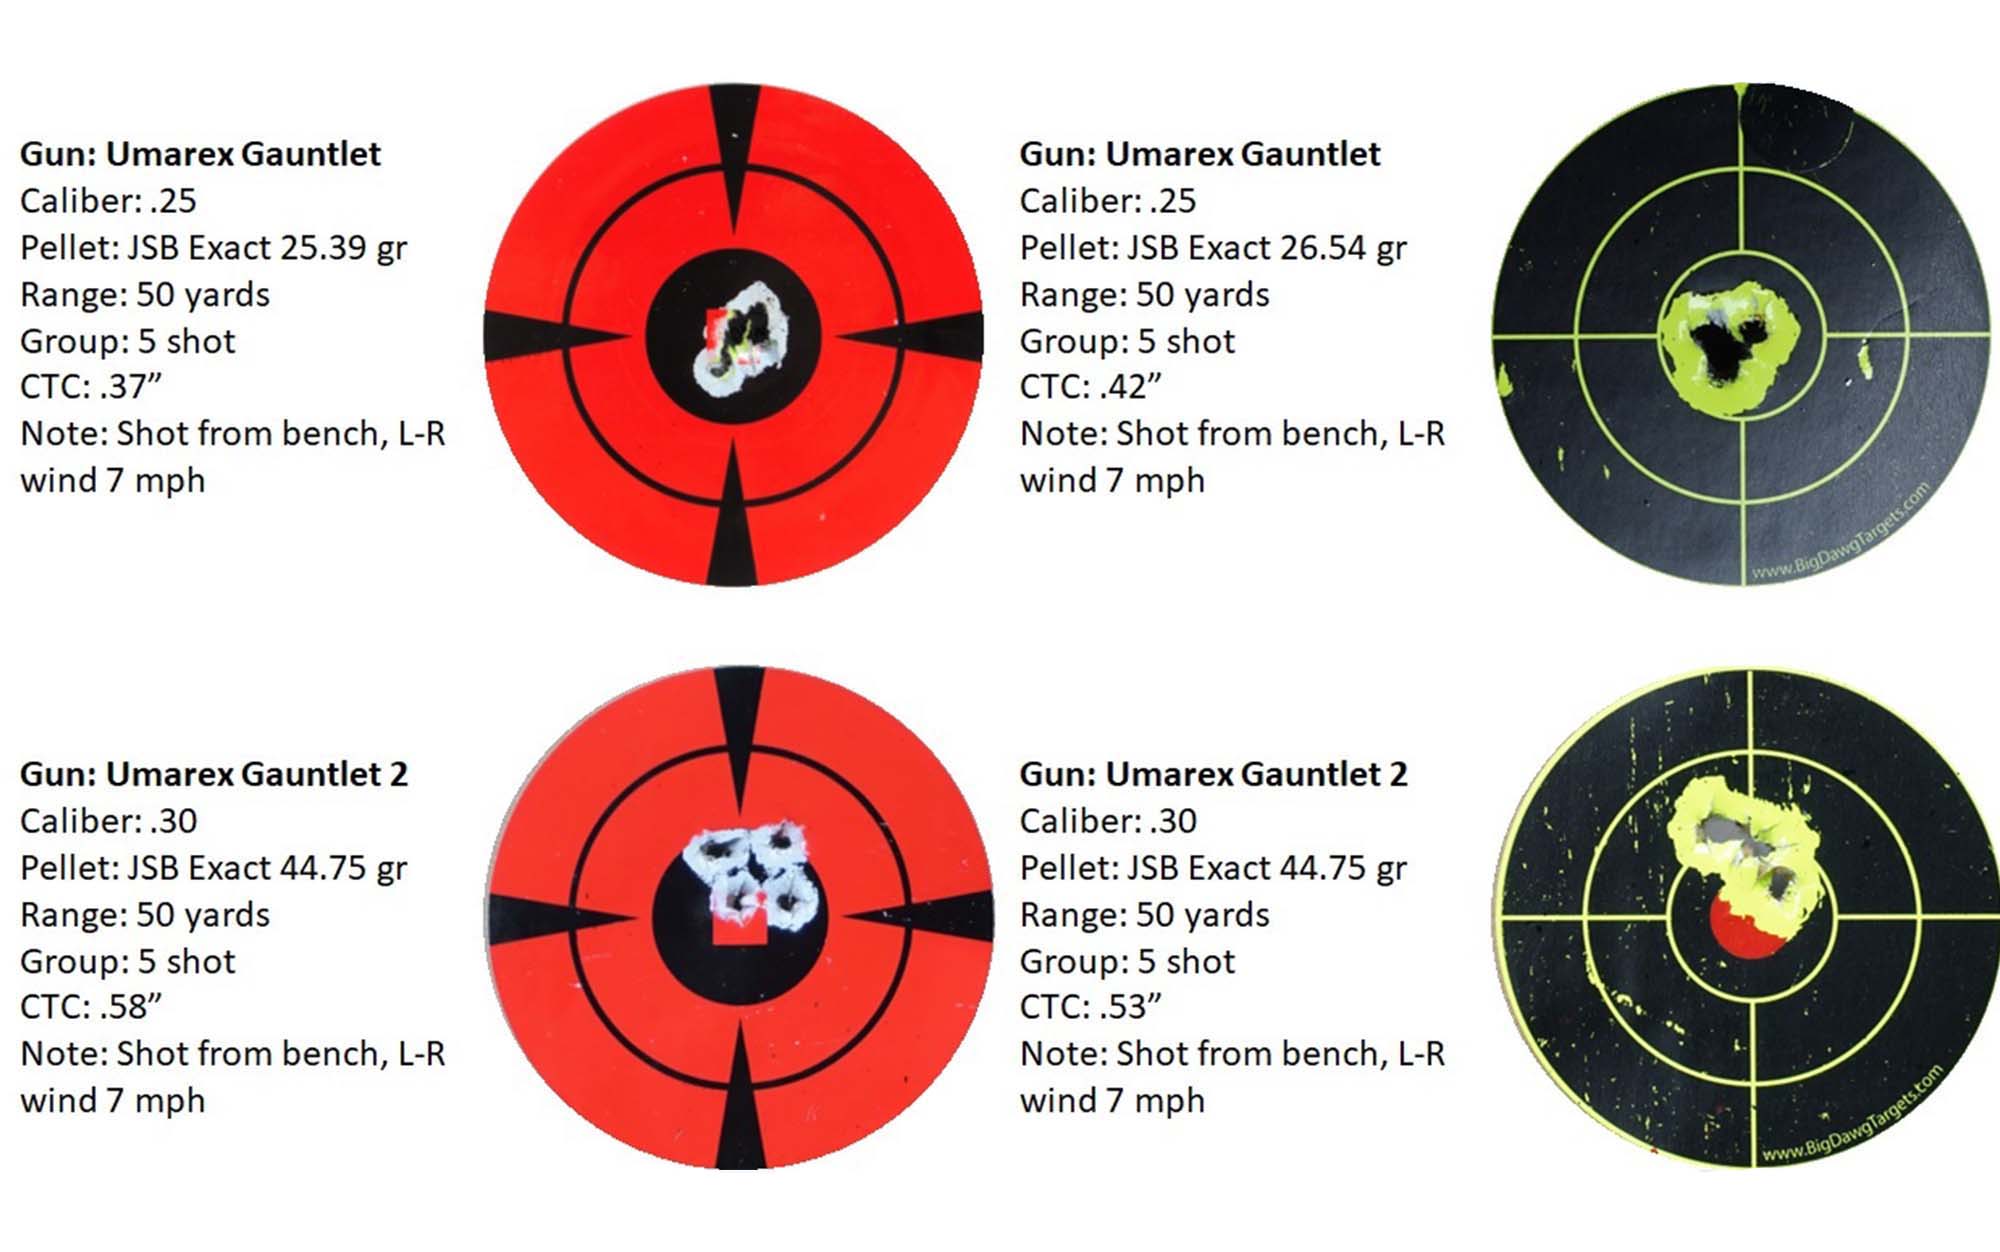 The Umarex Gauntlet shot groupings compared.